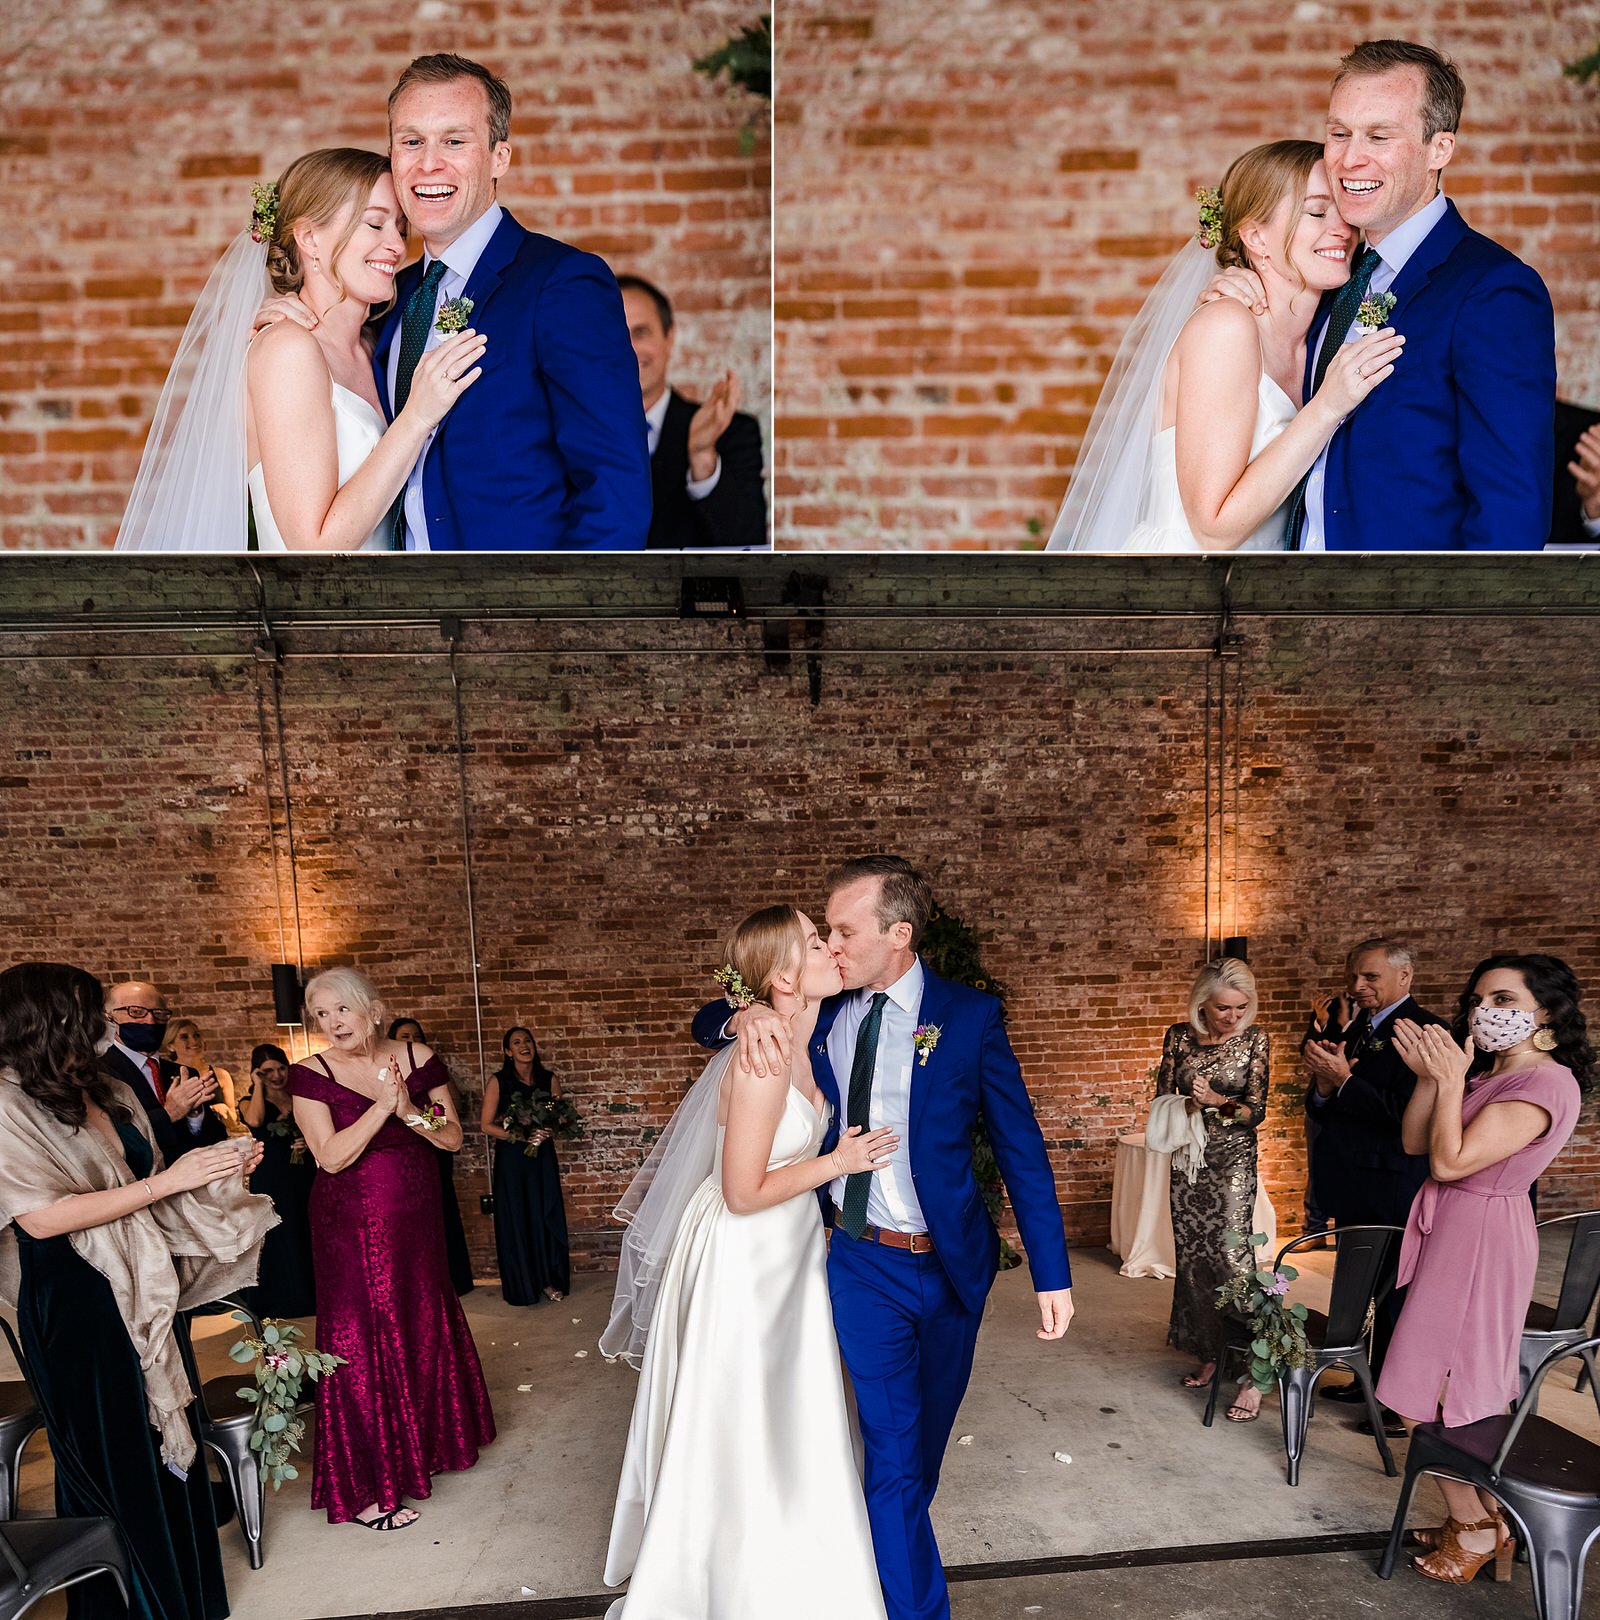 This couple's reactions after their first kiss as husband and wife are adorable!